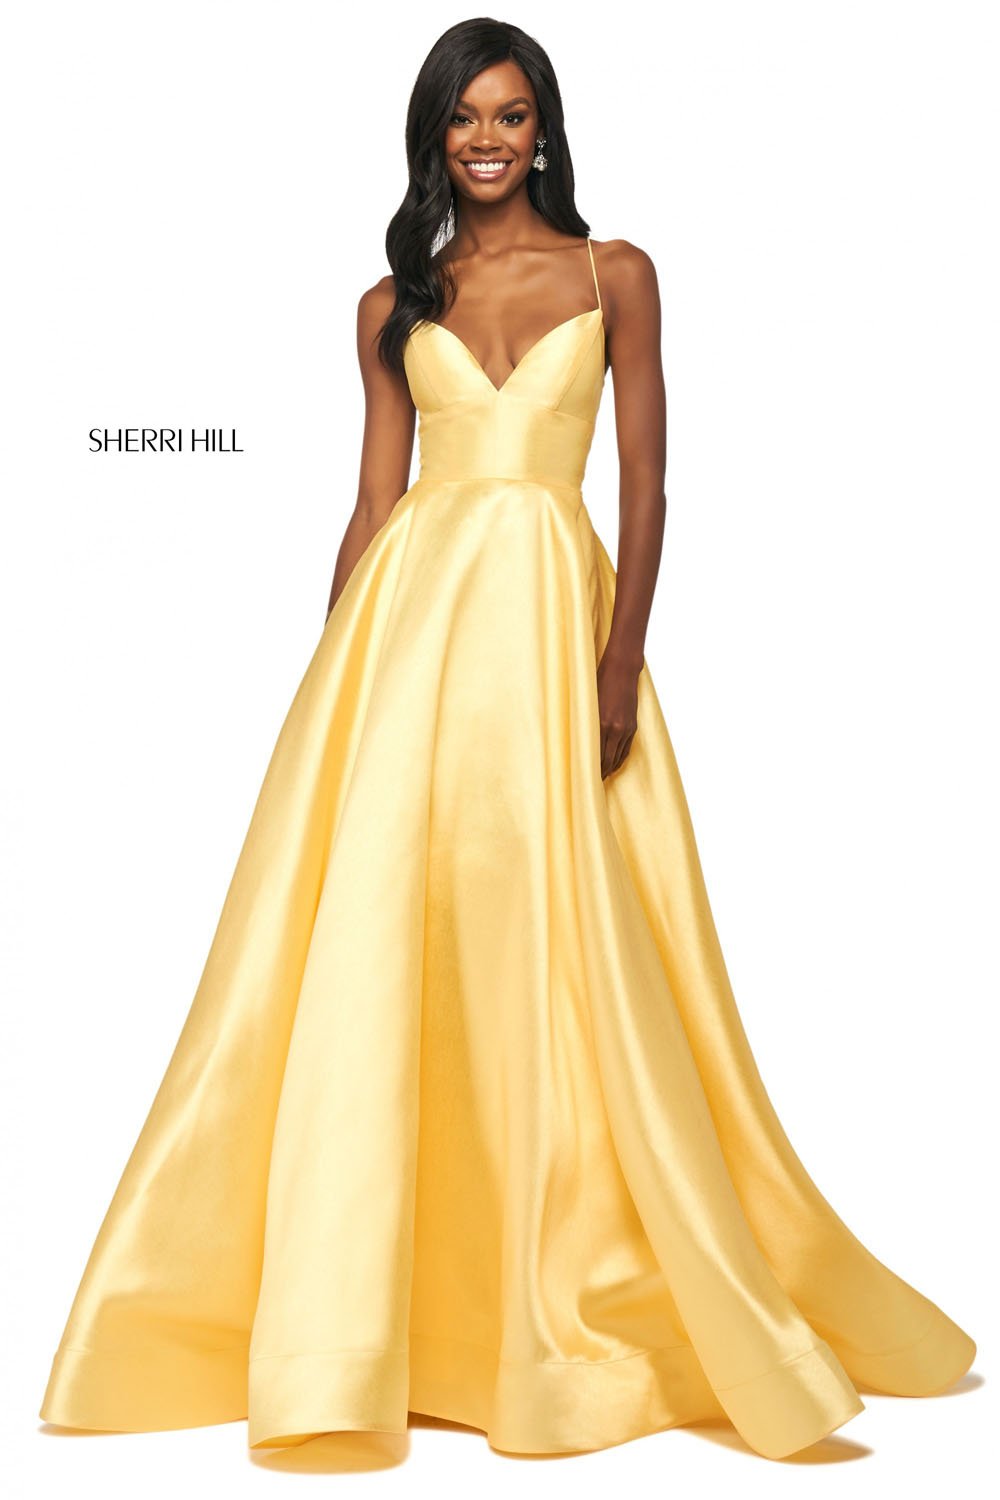 Sherri Hill 53661 dress images in these colors: Royal, Coral, Yellow, Red, Blush, Navy, Lilac, Fuchsia, Light Blue, Aqua, Emerald, Orange, Pink, Black.